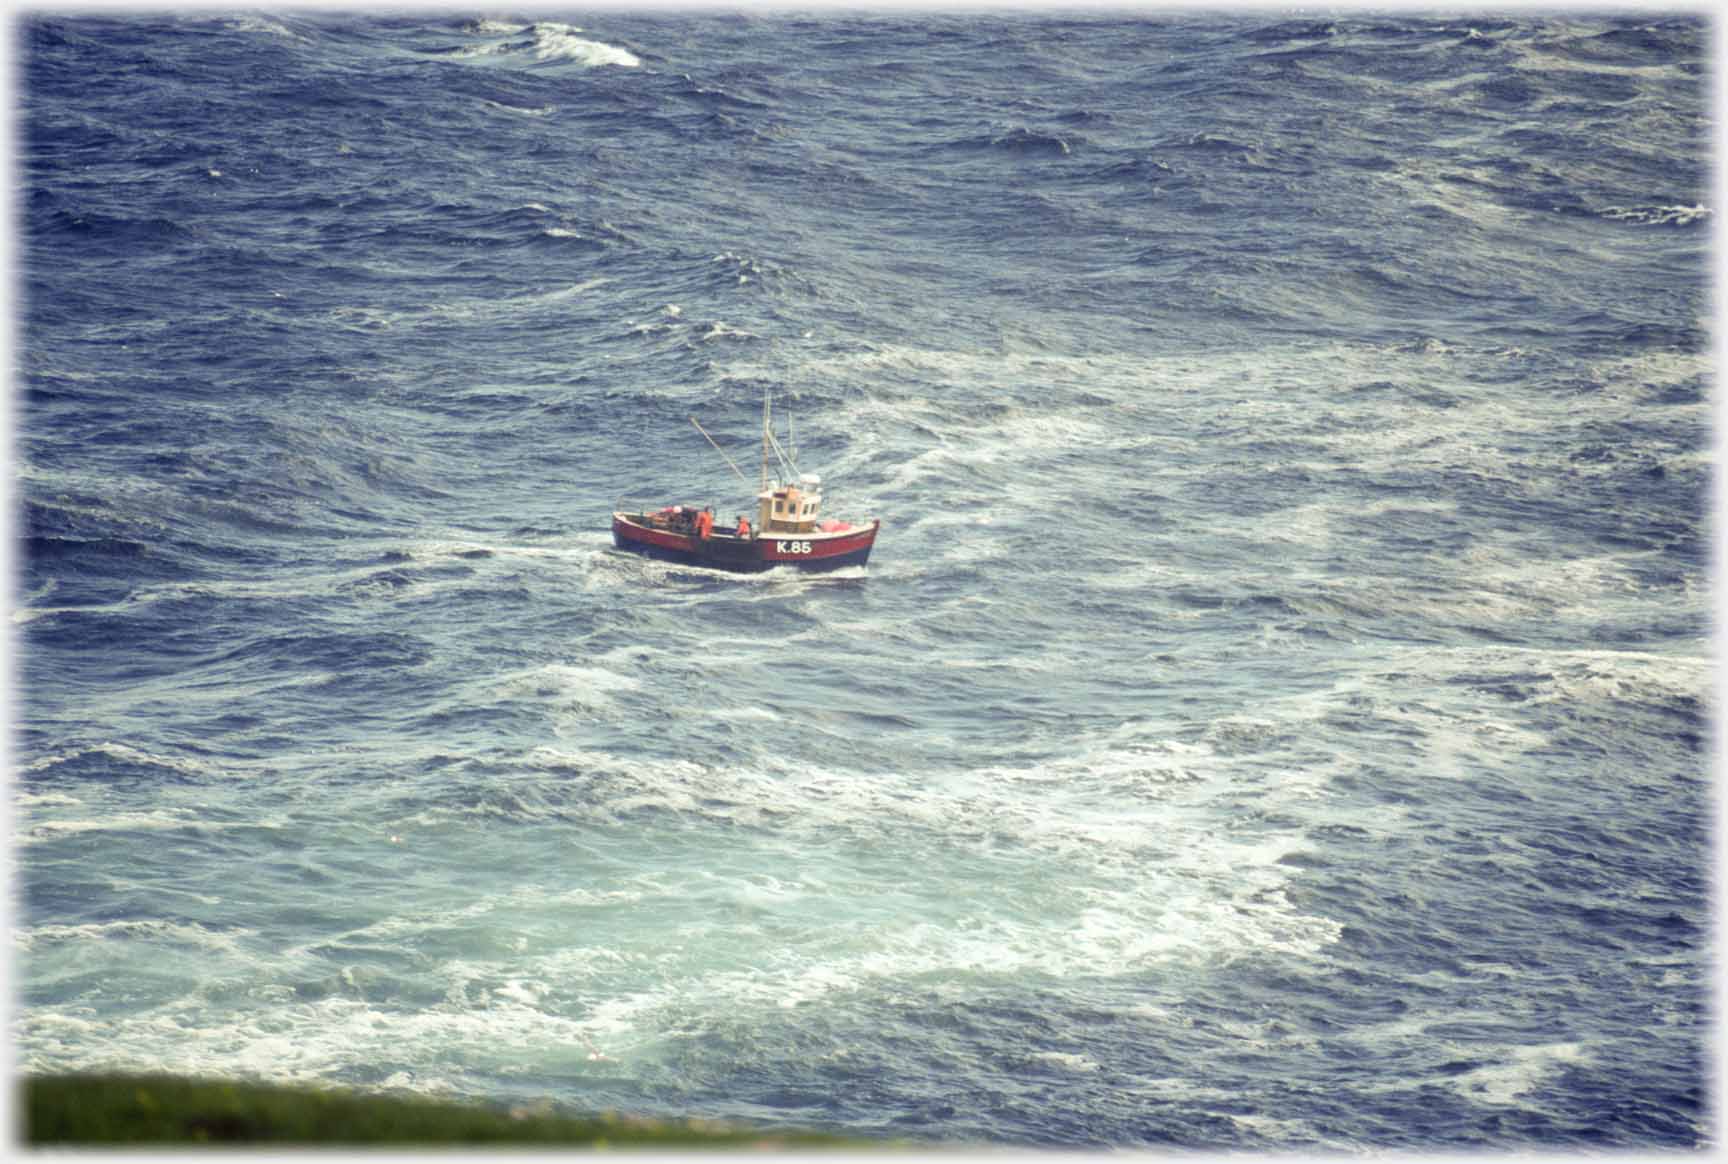 Small fishing boat in swell.